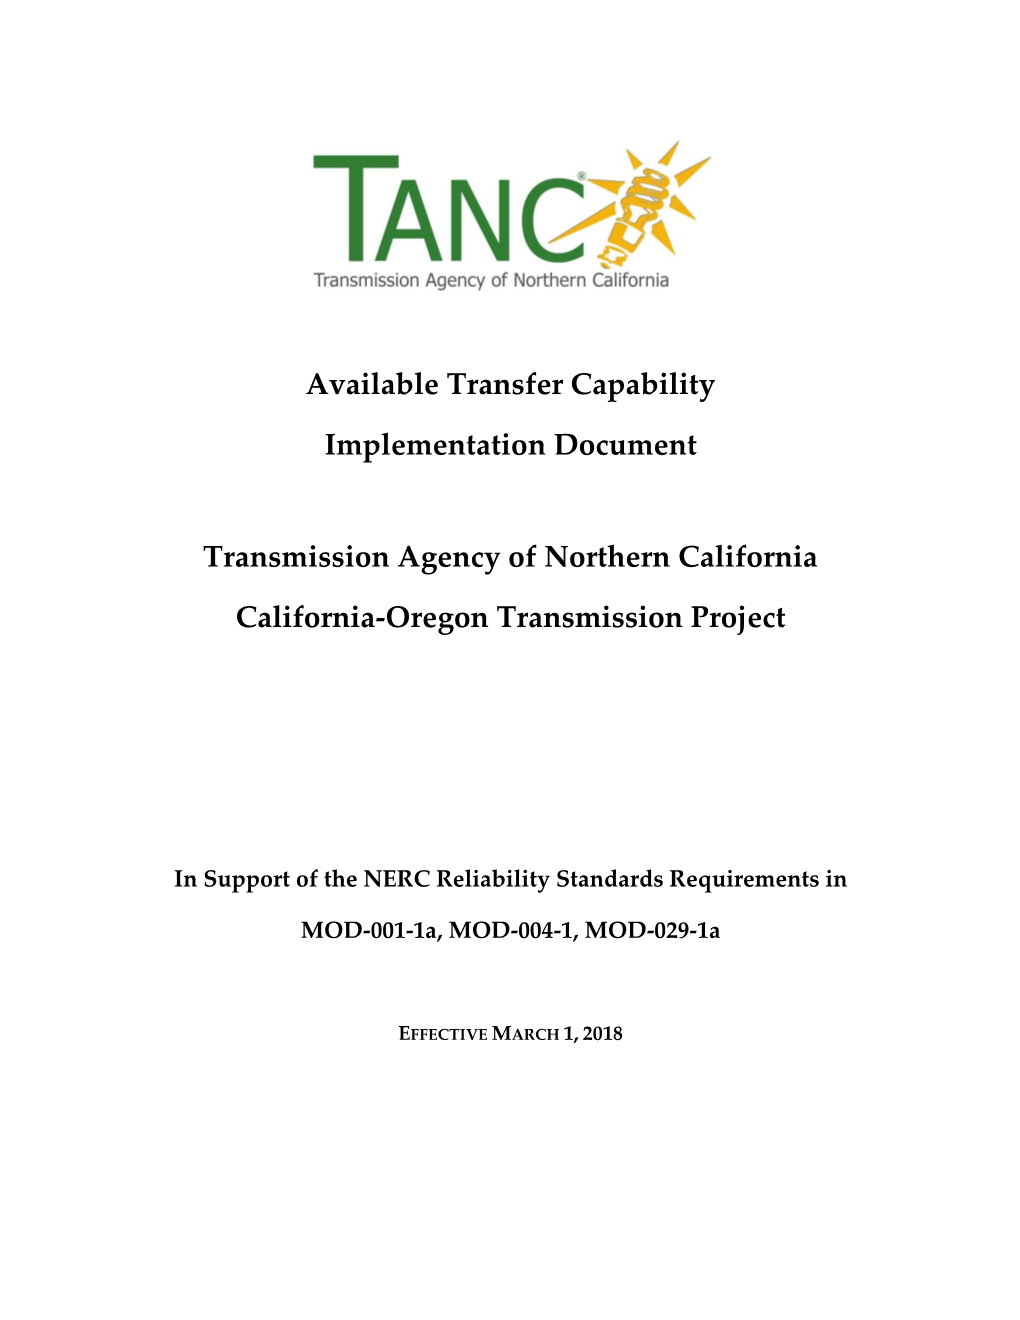 Available Transfer Capability Implementation Document